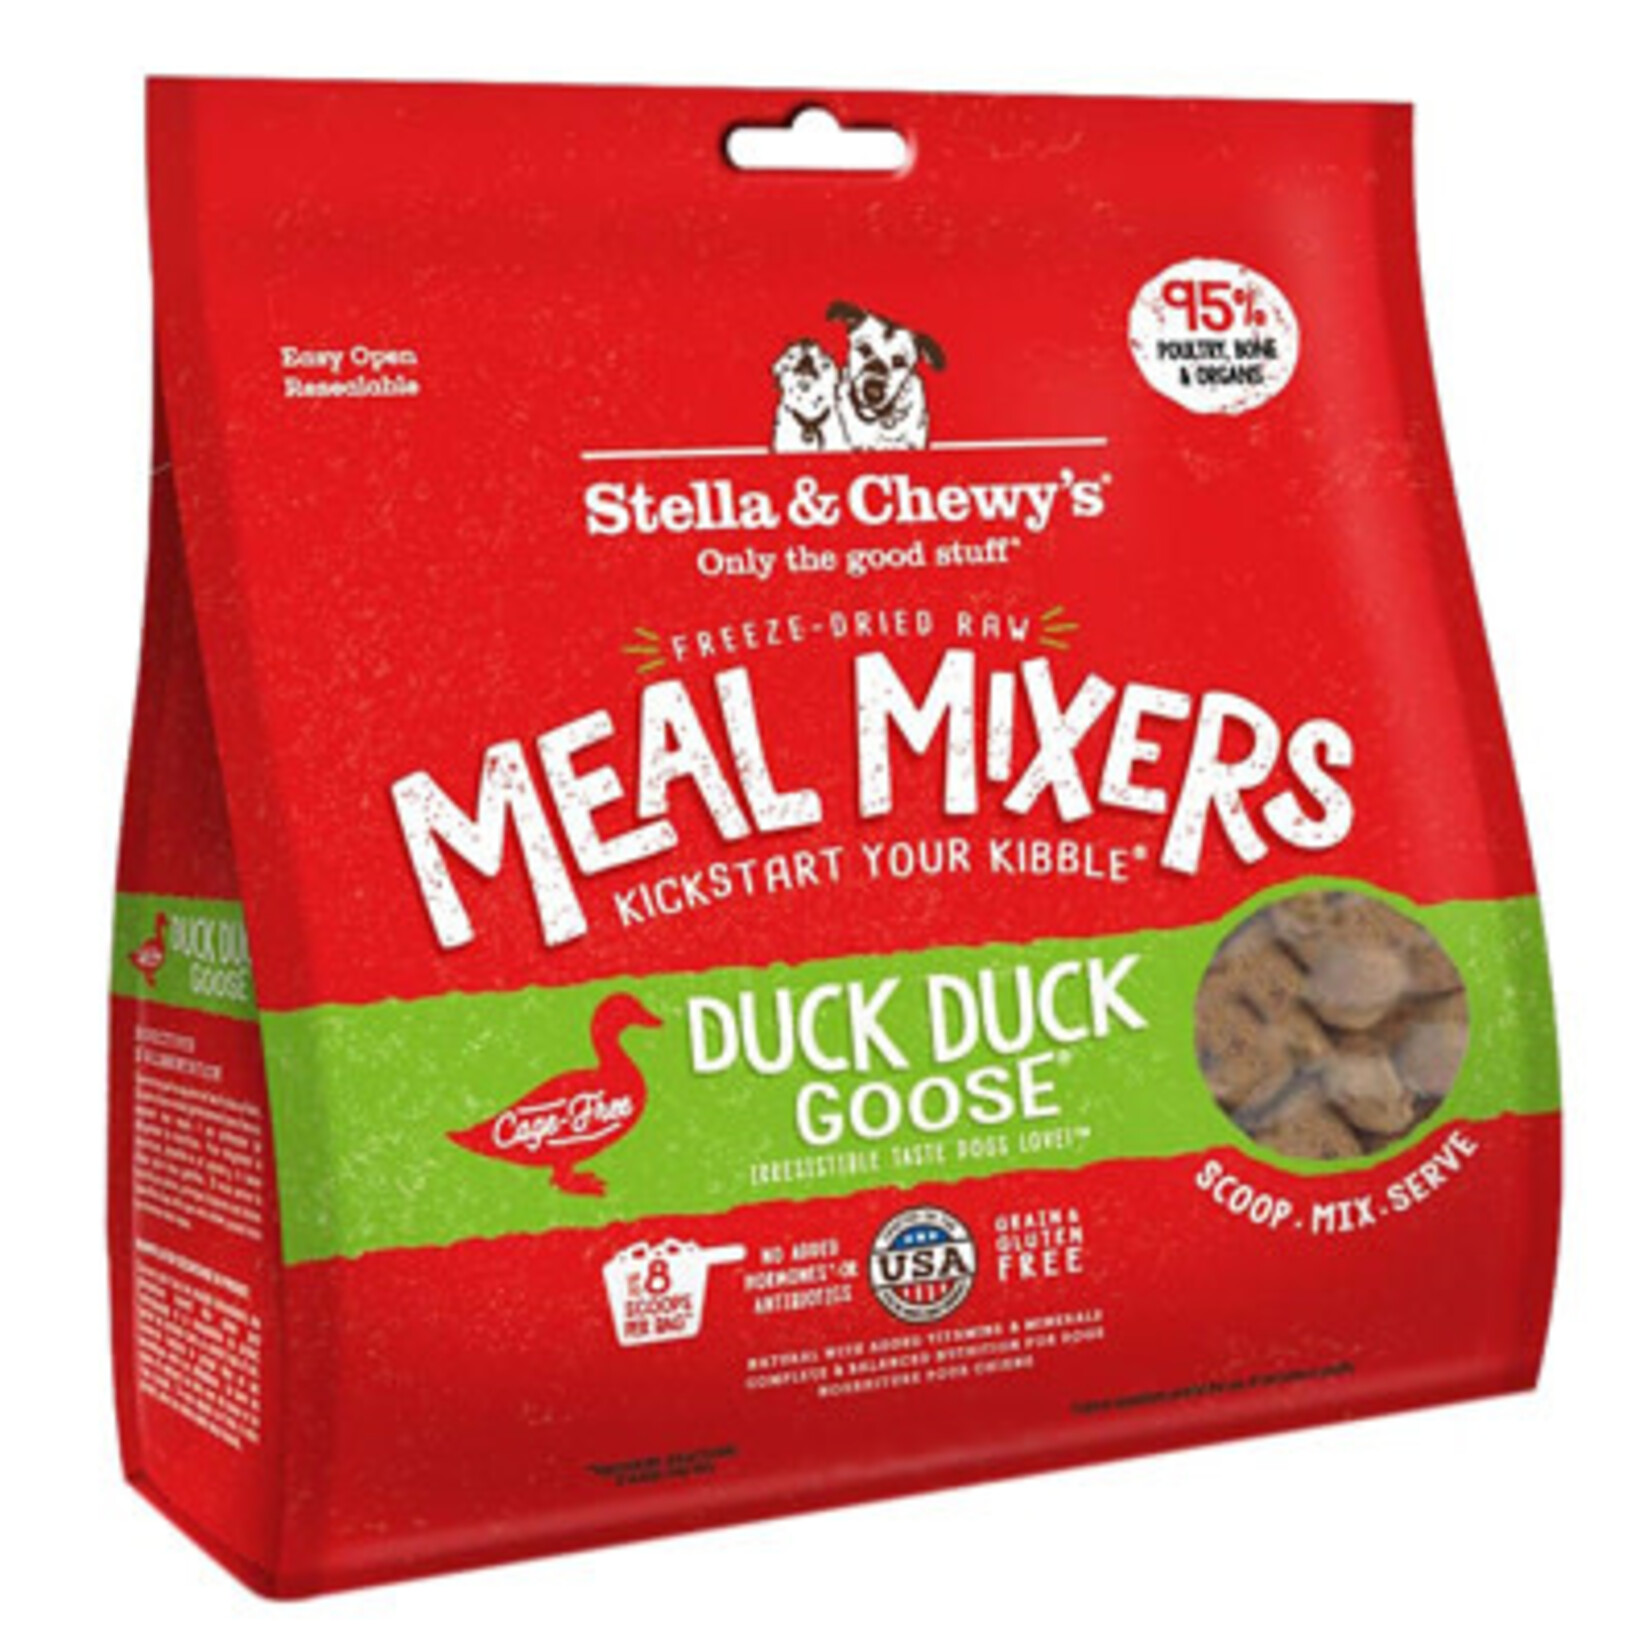 Stella & Chewy's Stella & Chewy's Raw Freeze Dried Duck Meal Mixers Dog